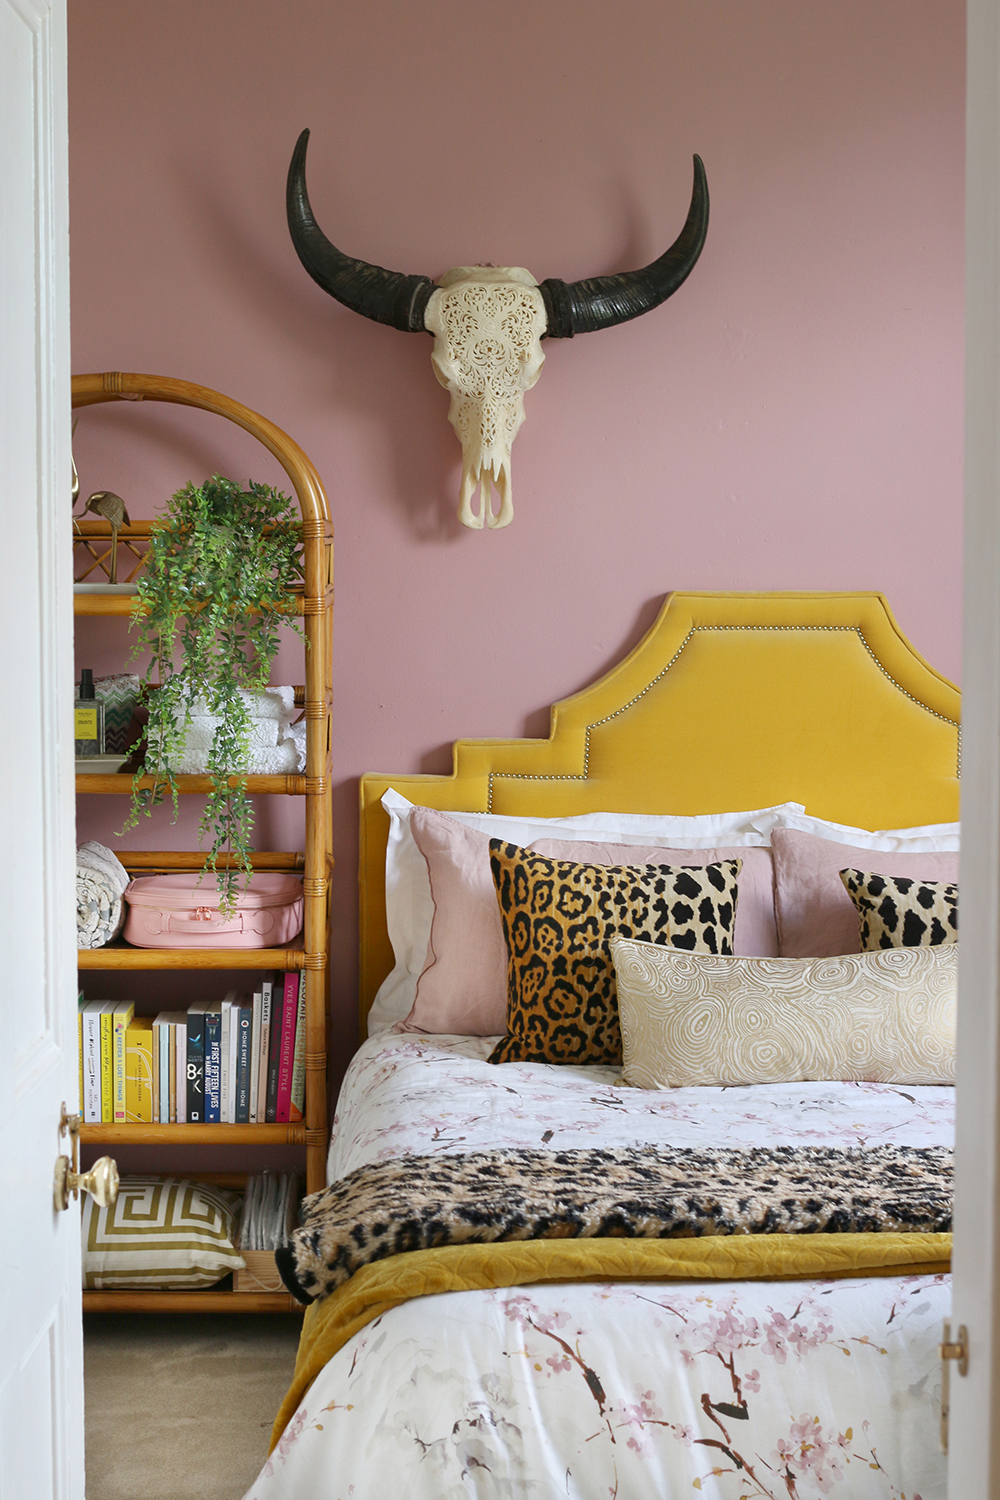 Blush pink bedroom with leopard print home accents